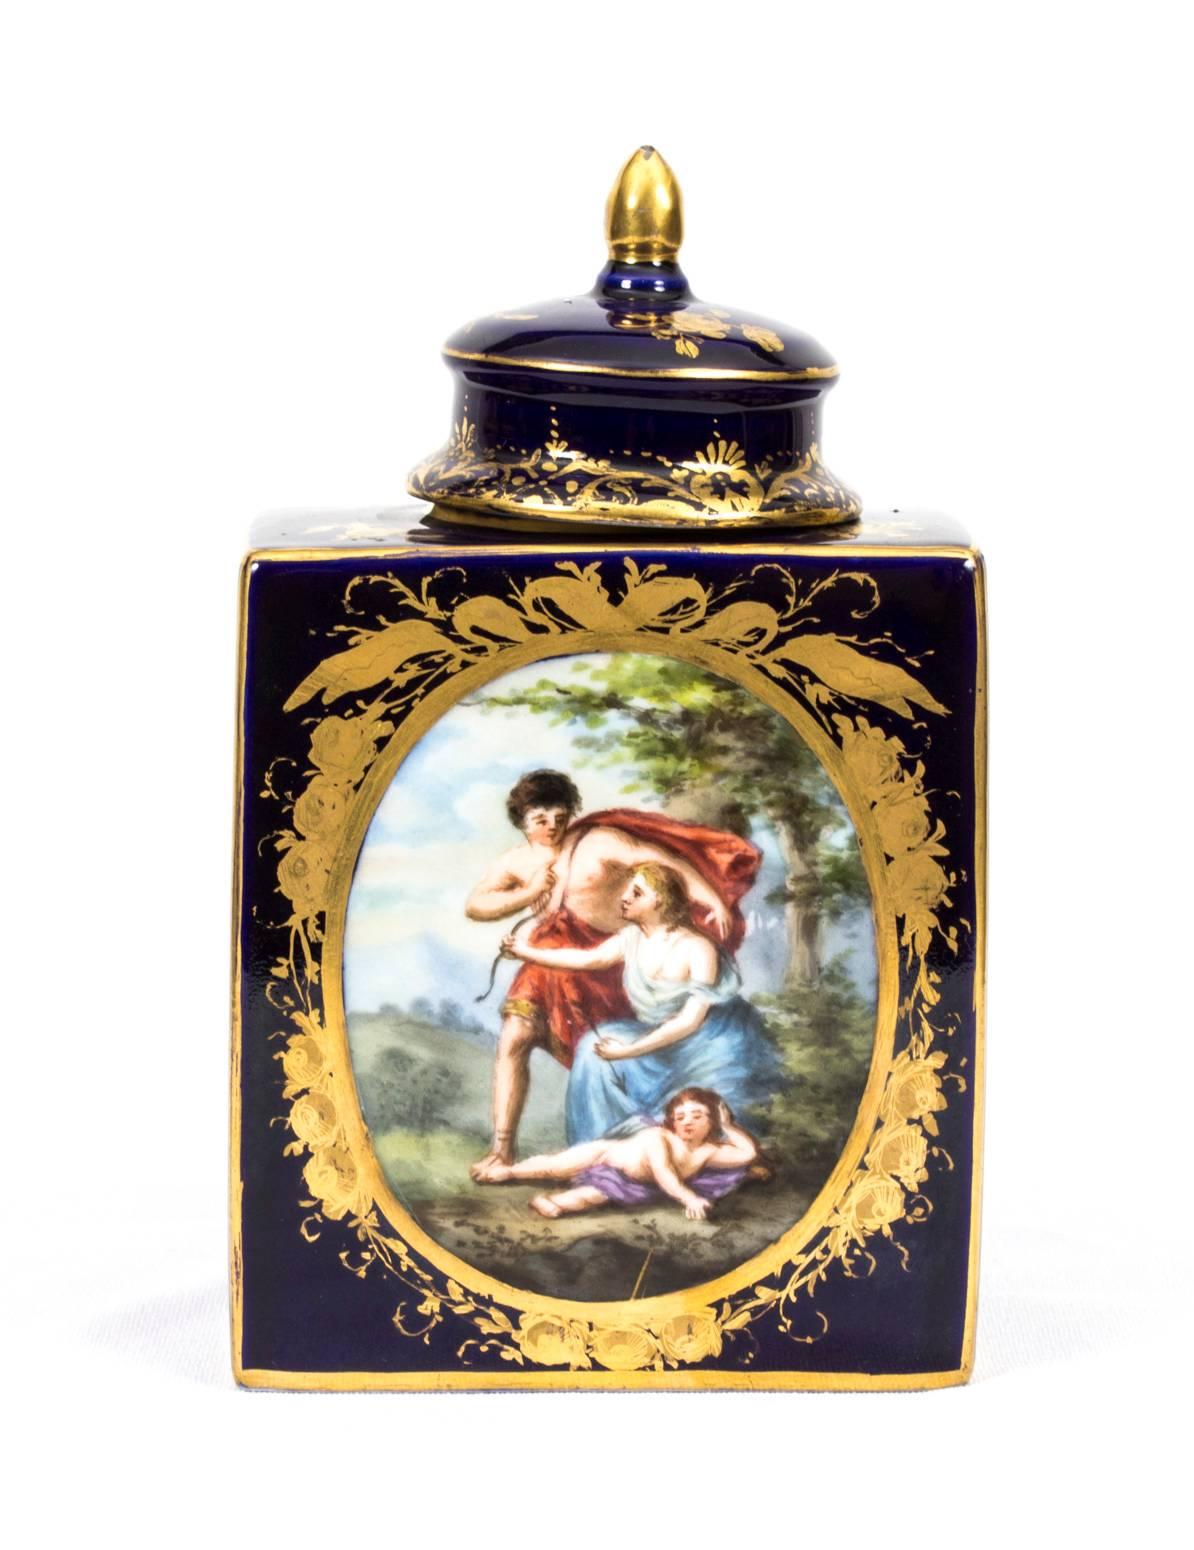 This is a delightful antique Vienna porcelain tea cannister and cover, circa 1900 in date.

It is beautifully painted with an oval gilt framed classical scene on one side, and a mother and child on the other, bearing the printed blue